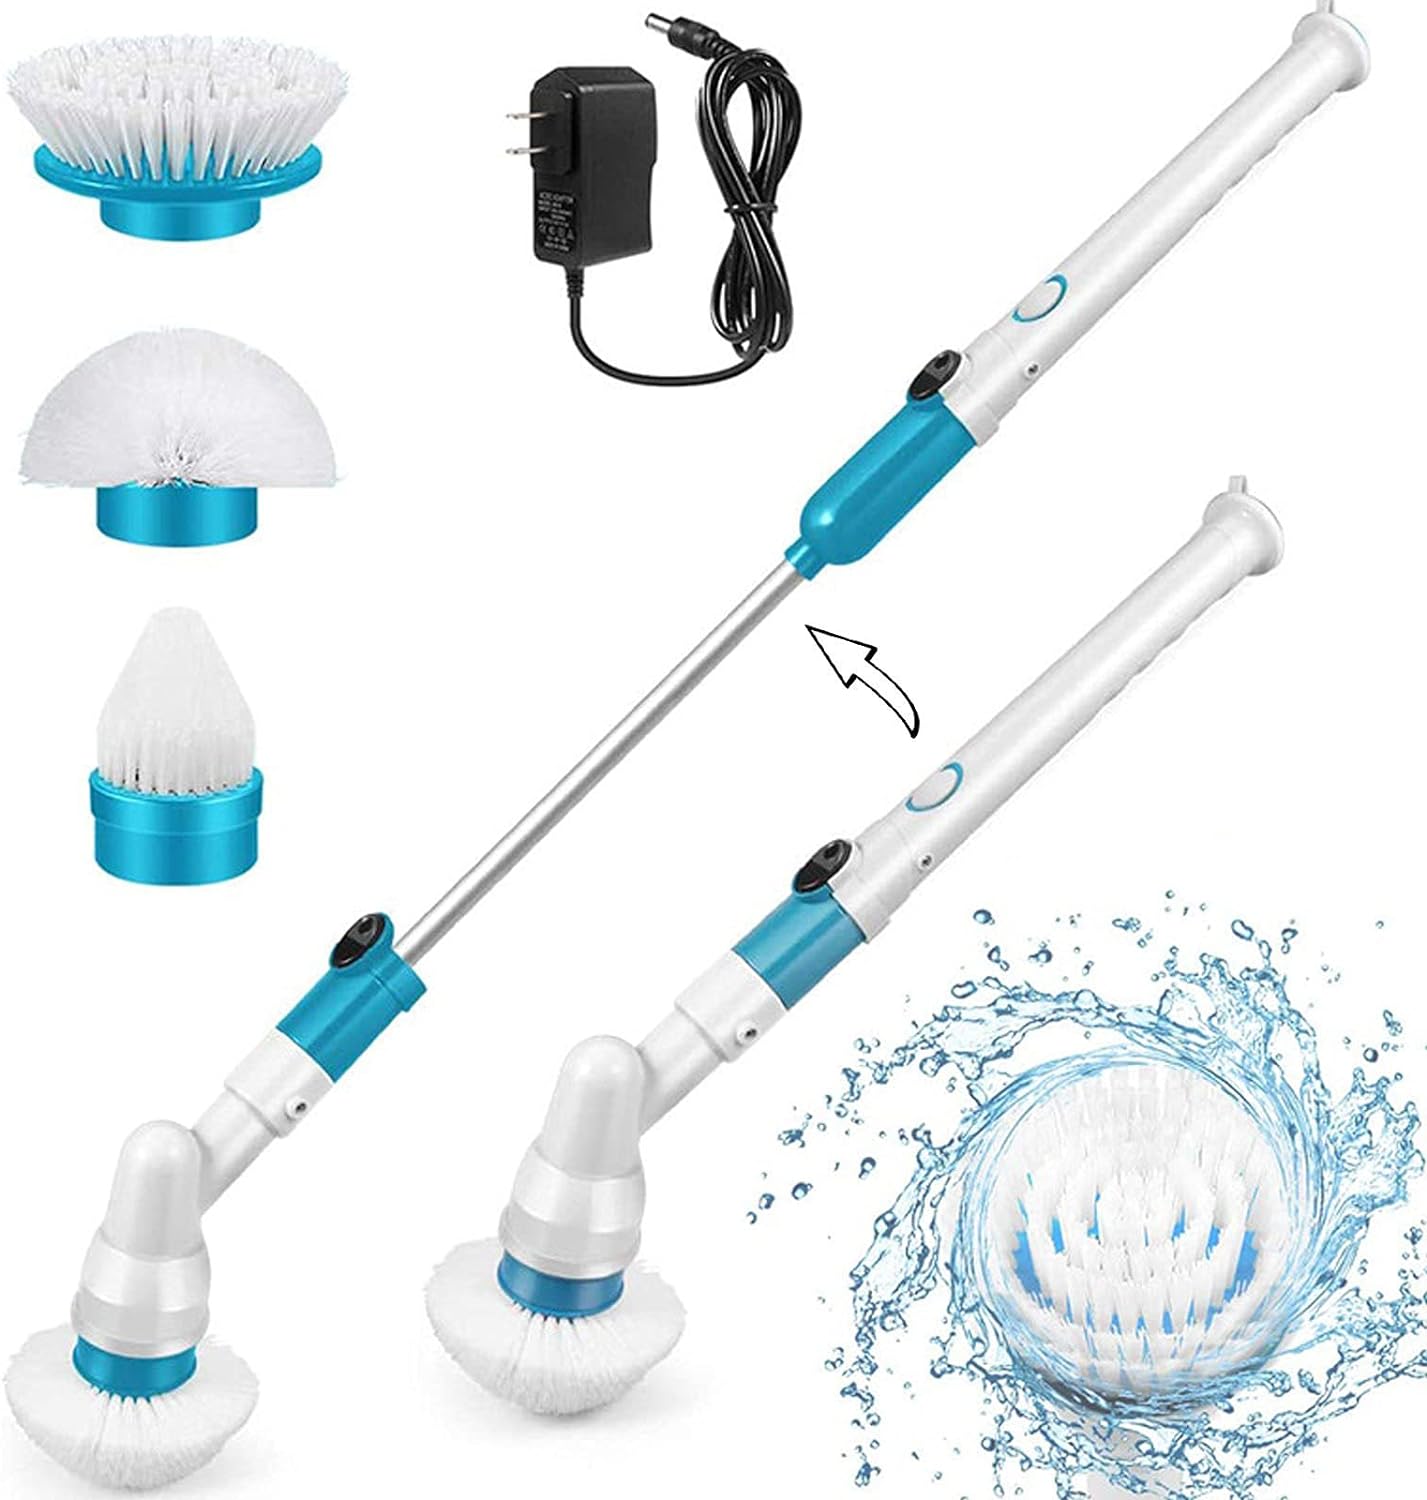 Multifunctional rechargeable cordless rotating electric cleaning brush with 3 heads